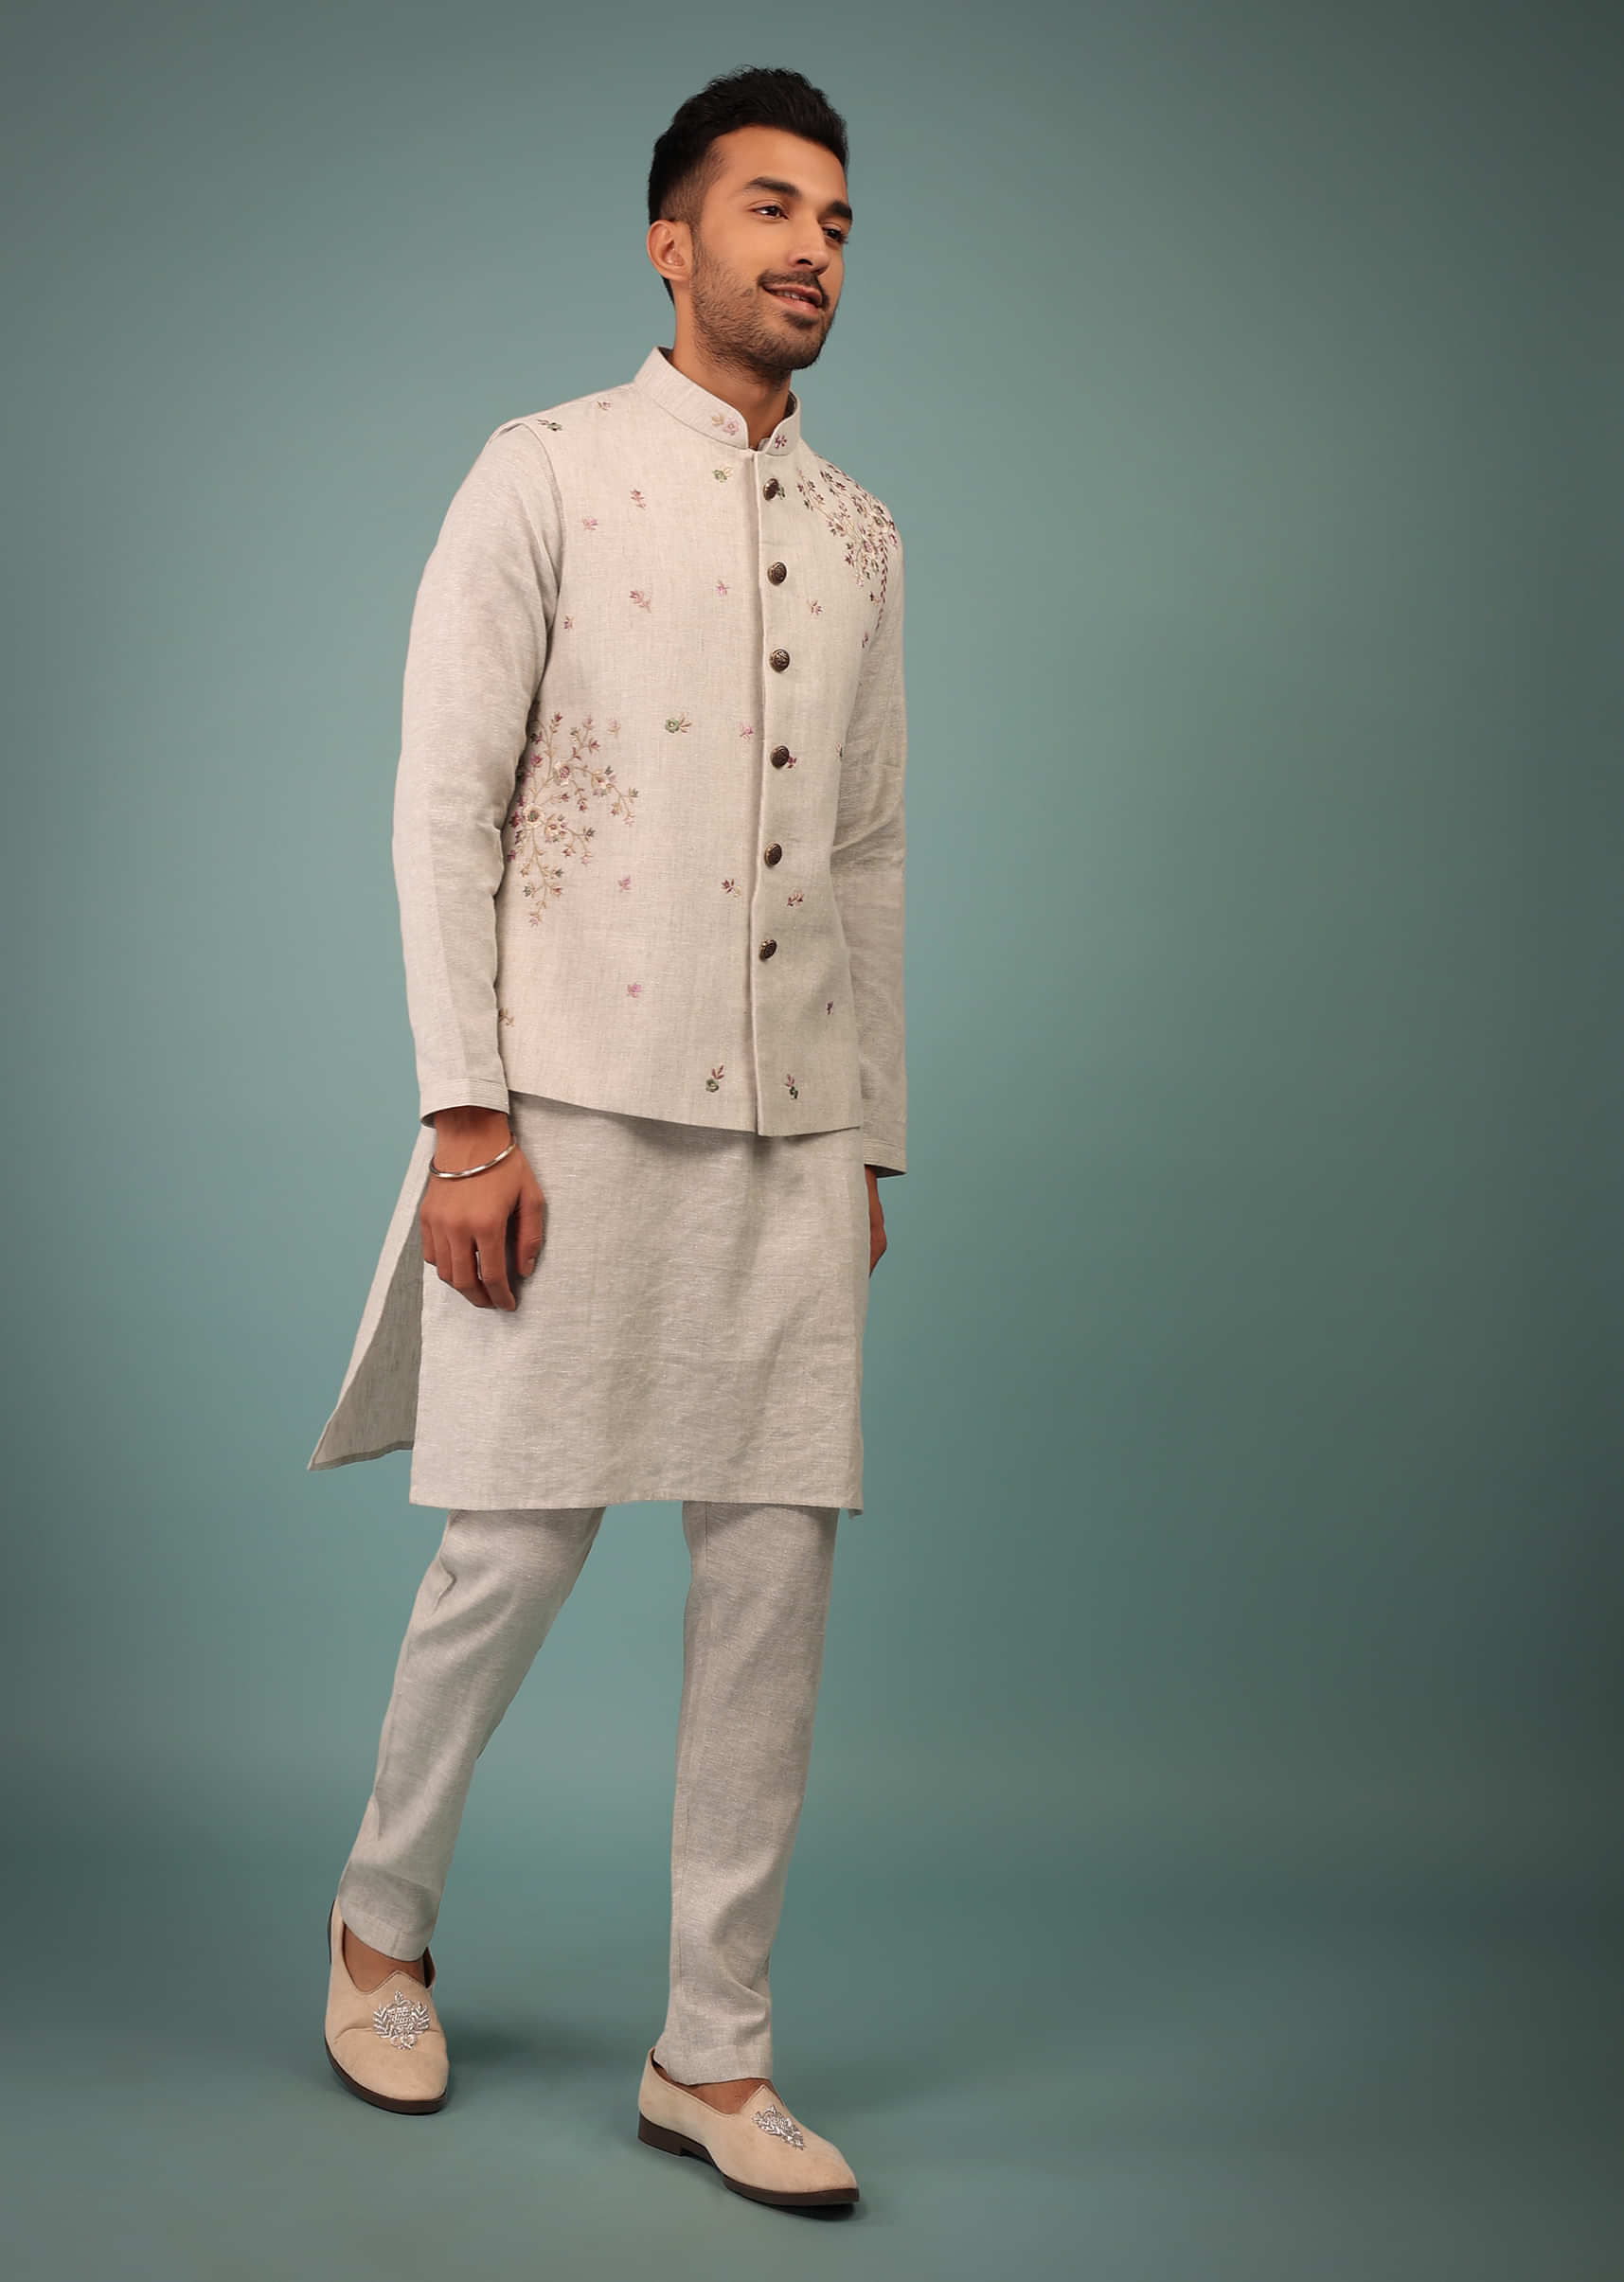 Kalki Birch White Bandi Jacket Set In Linen With Blooming Floral Embroidery